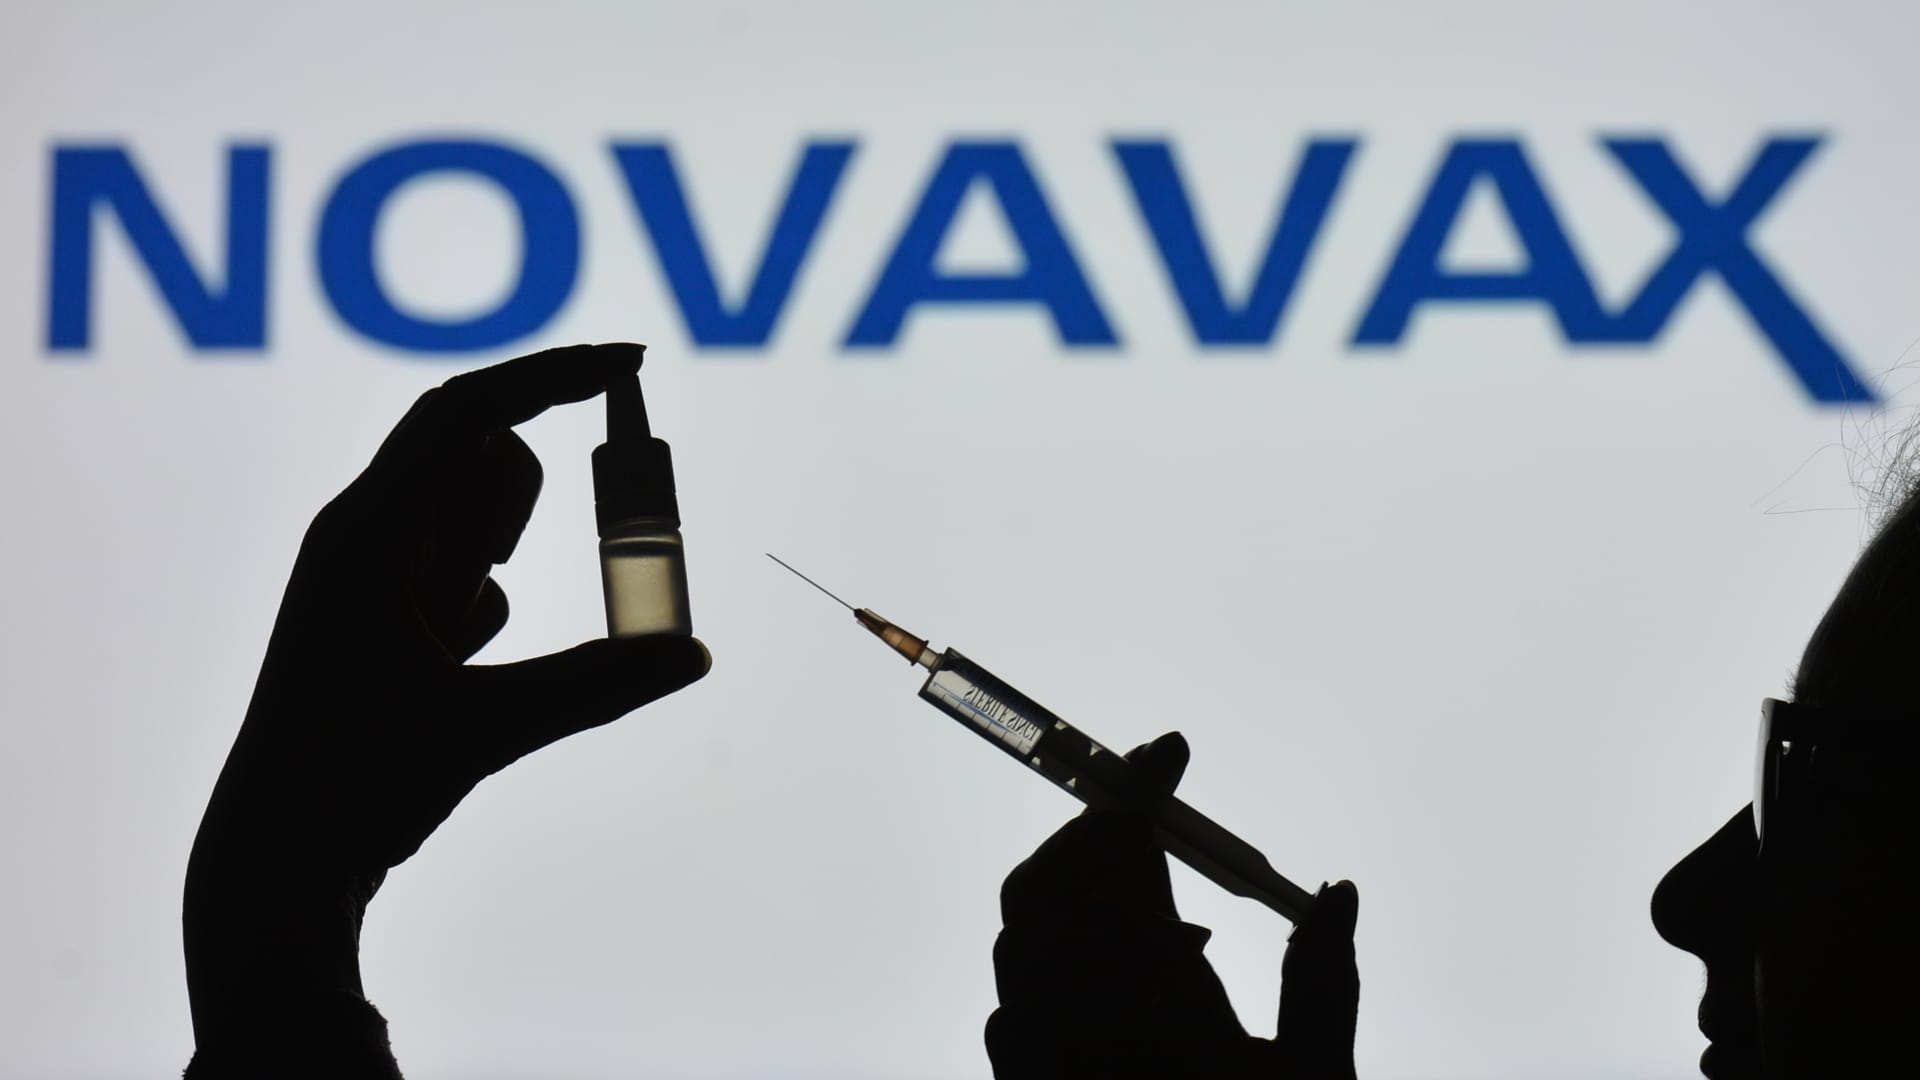 Novavax cuts 2022 revenue guidance in half, stock tanks in after-hours trading